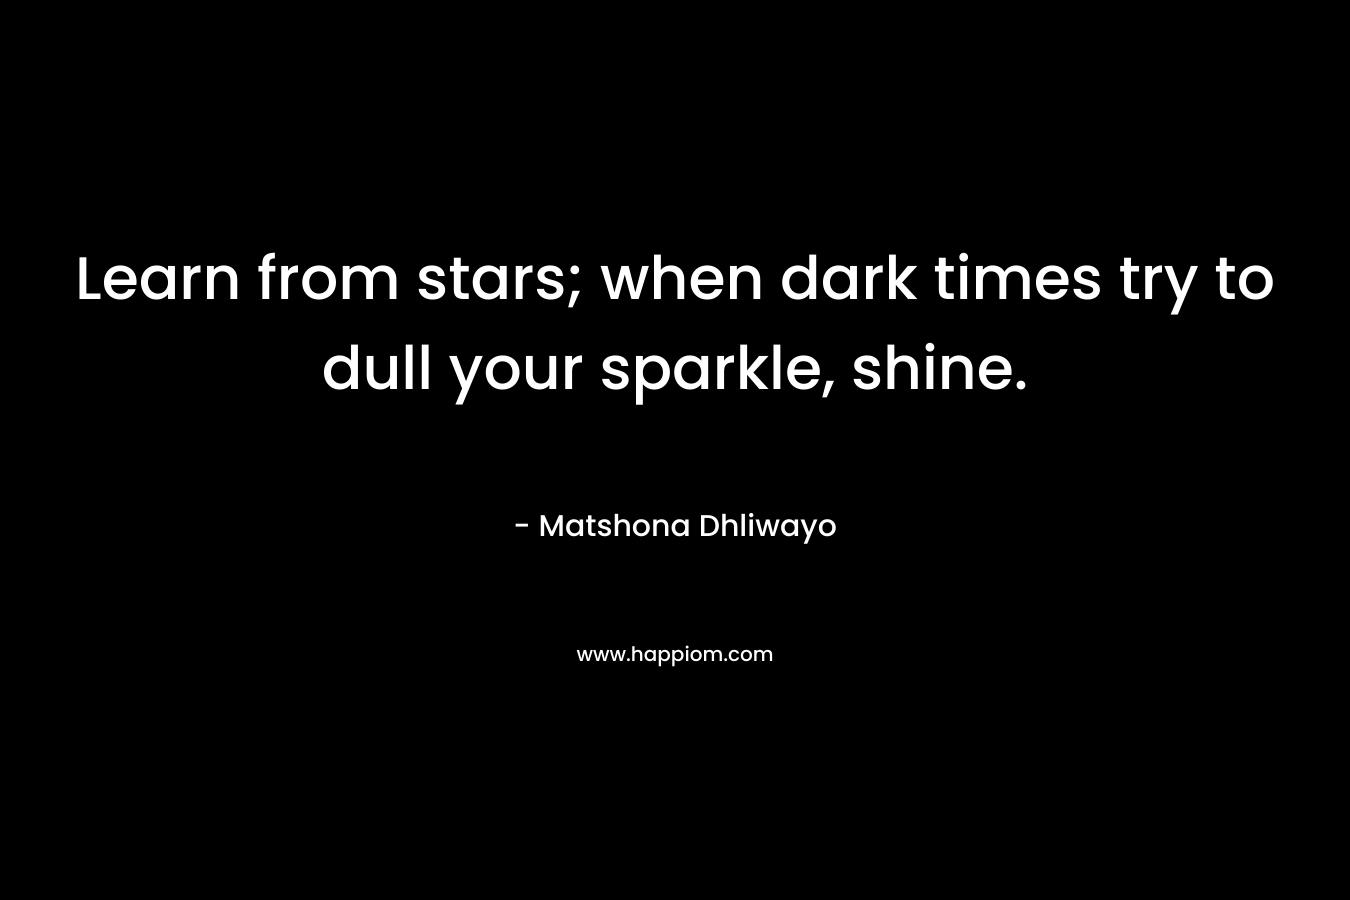 Learn from stars; when dark times try to dull your sparkle, shine.